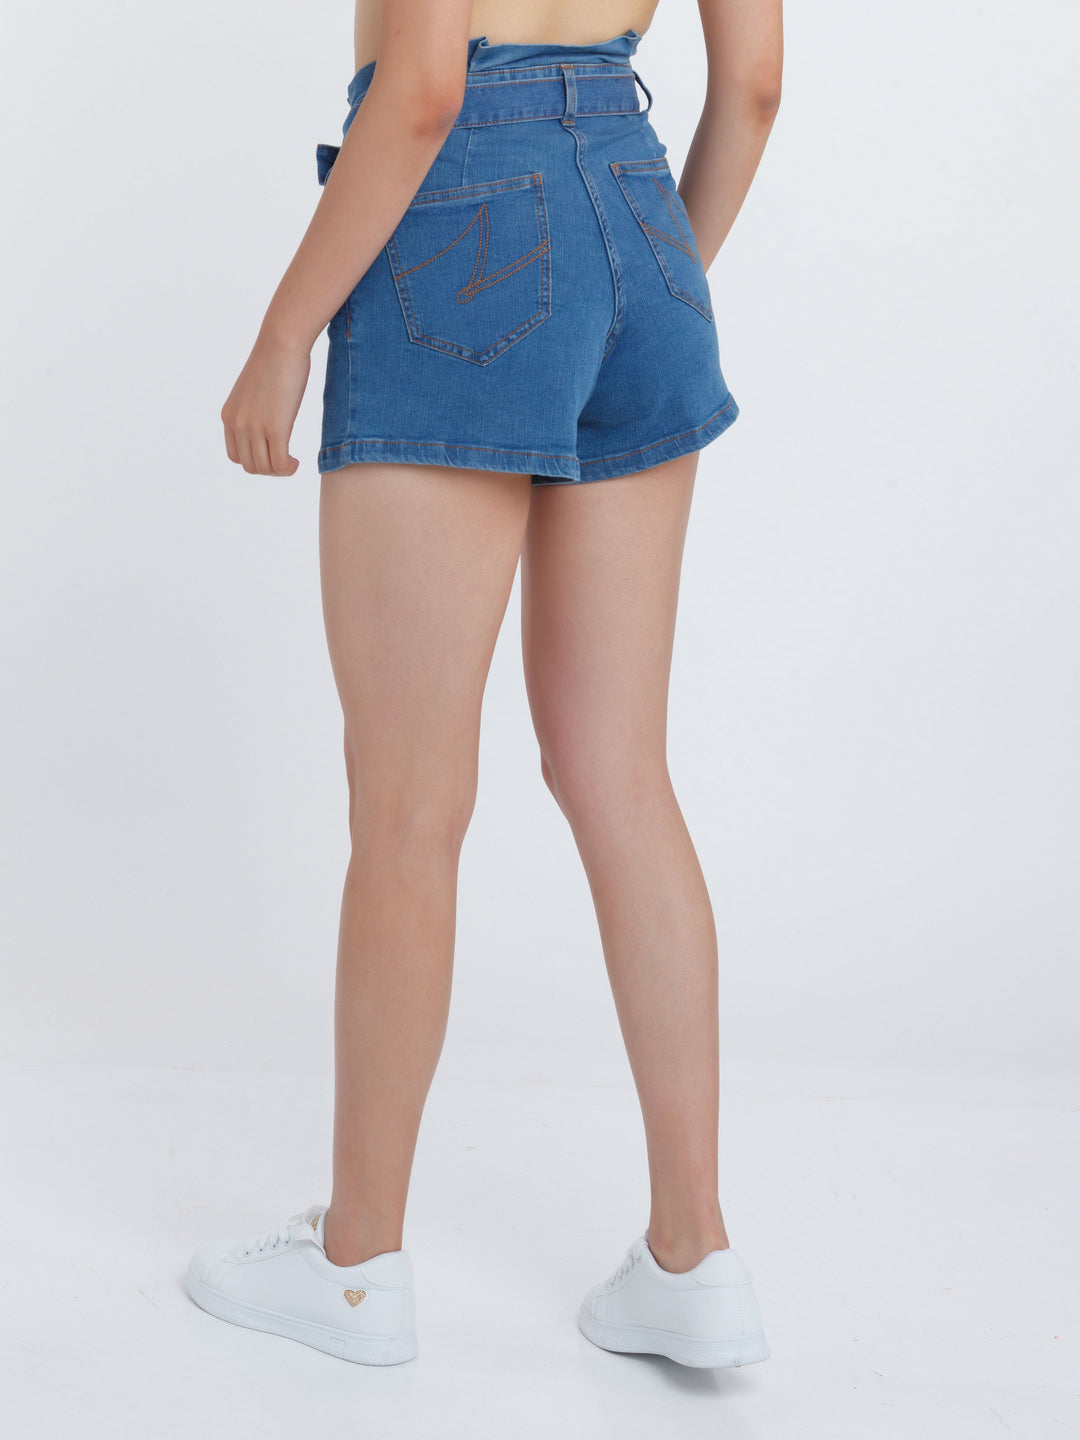 Buy Light Blue Shorts for Women by MAX Online | Ajio.com